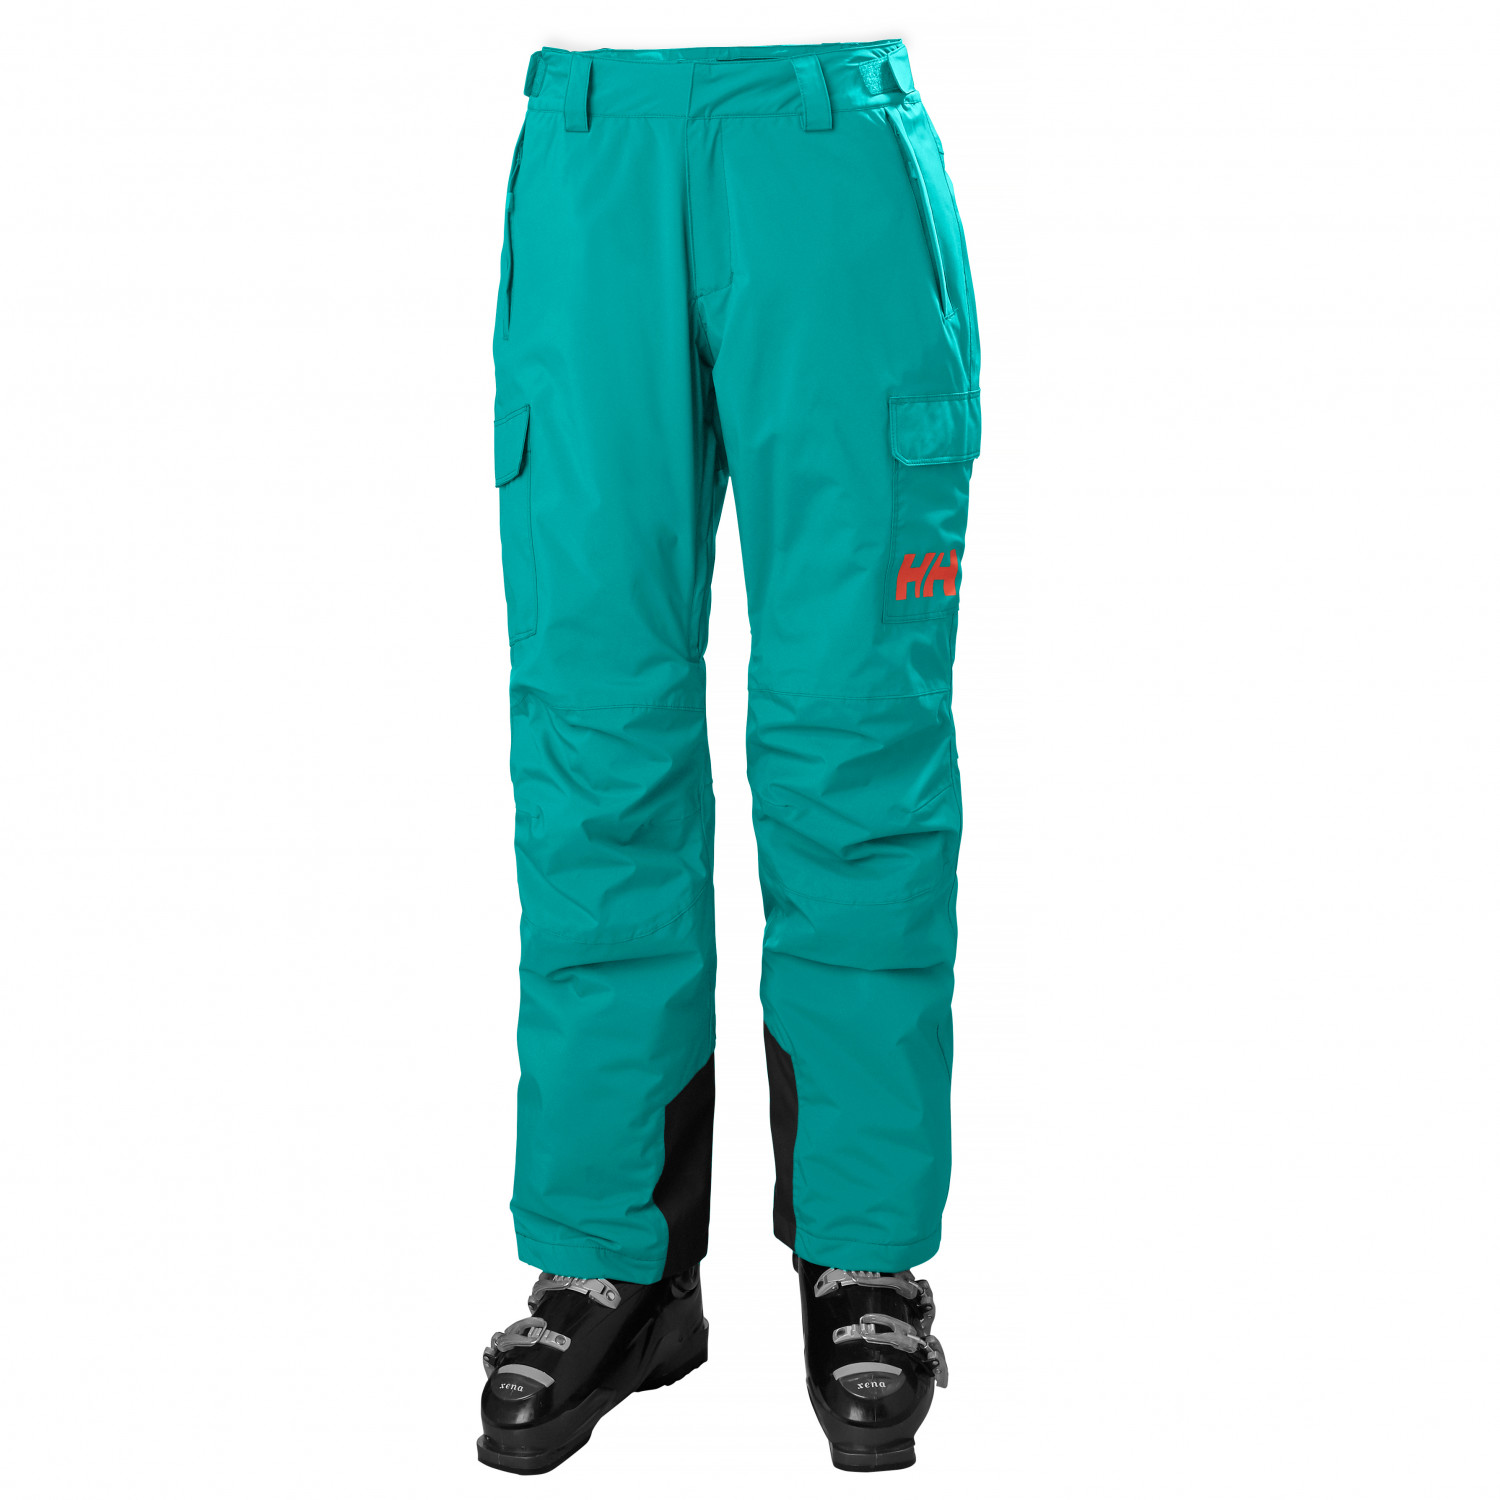 Helly Hansen - Women's Switch Cargo Insulated Pant - Skihose